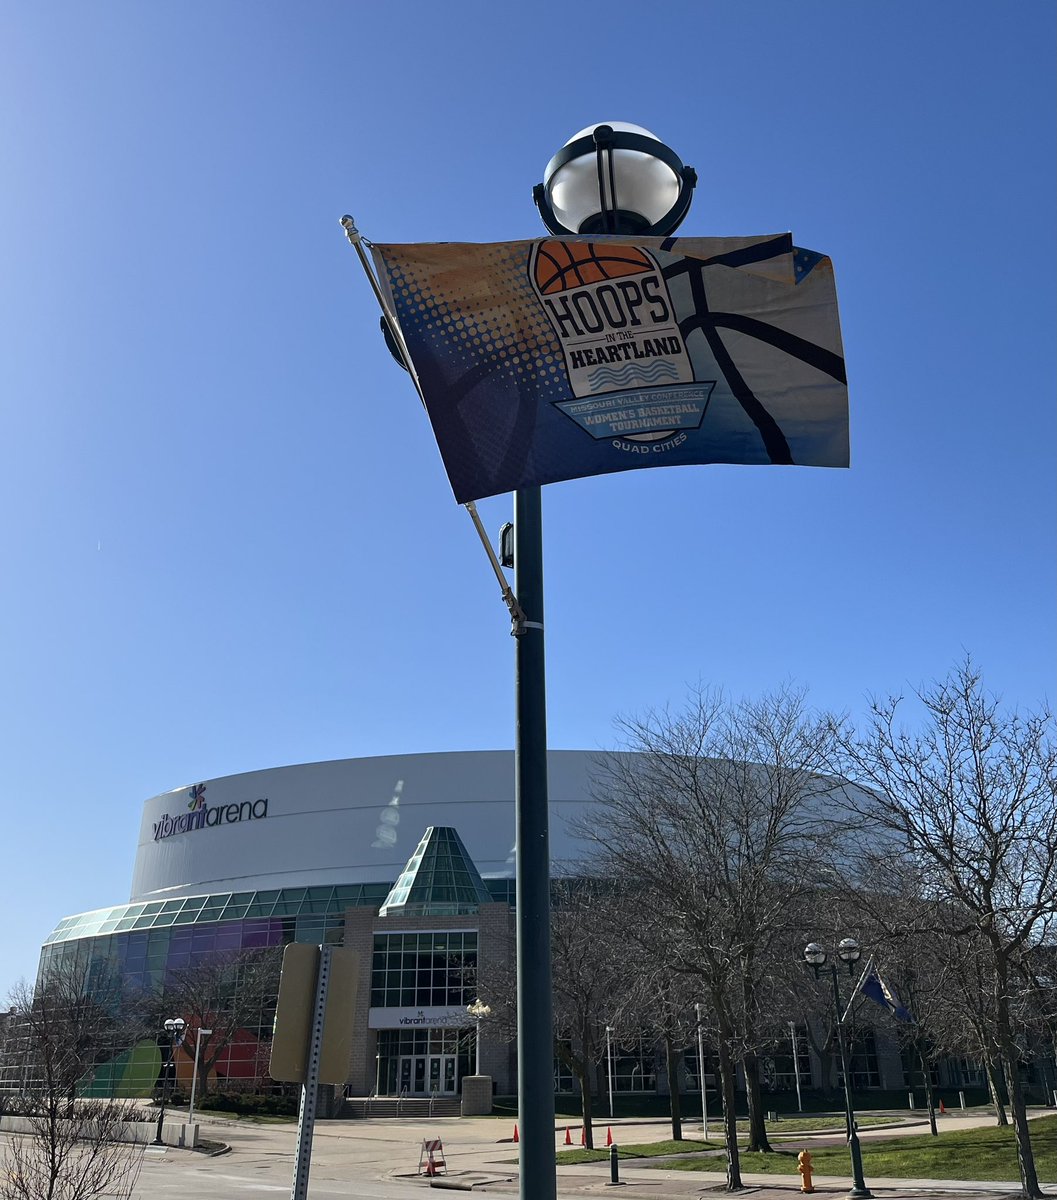 Ready for a great week as host of #HoopsintheHeartland @MVCsports @VibrantArena @VisitQuadCities. Great things will be happening in and out of this venue in just a few days. #SportsQC